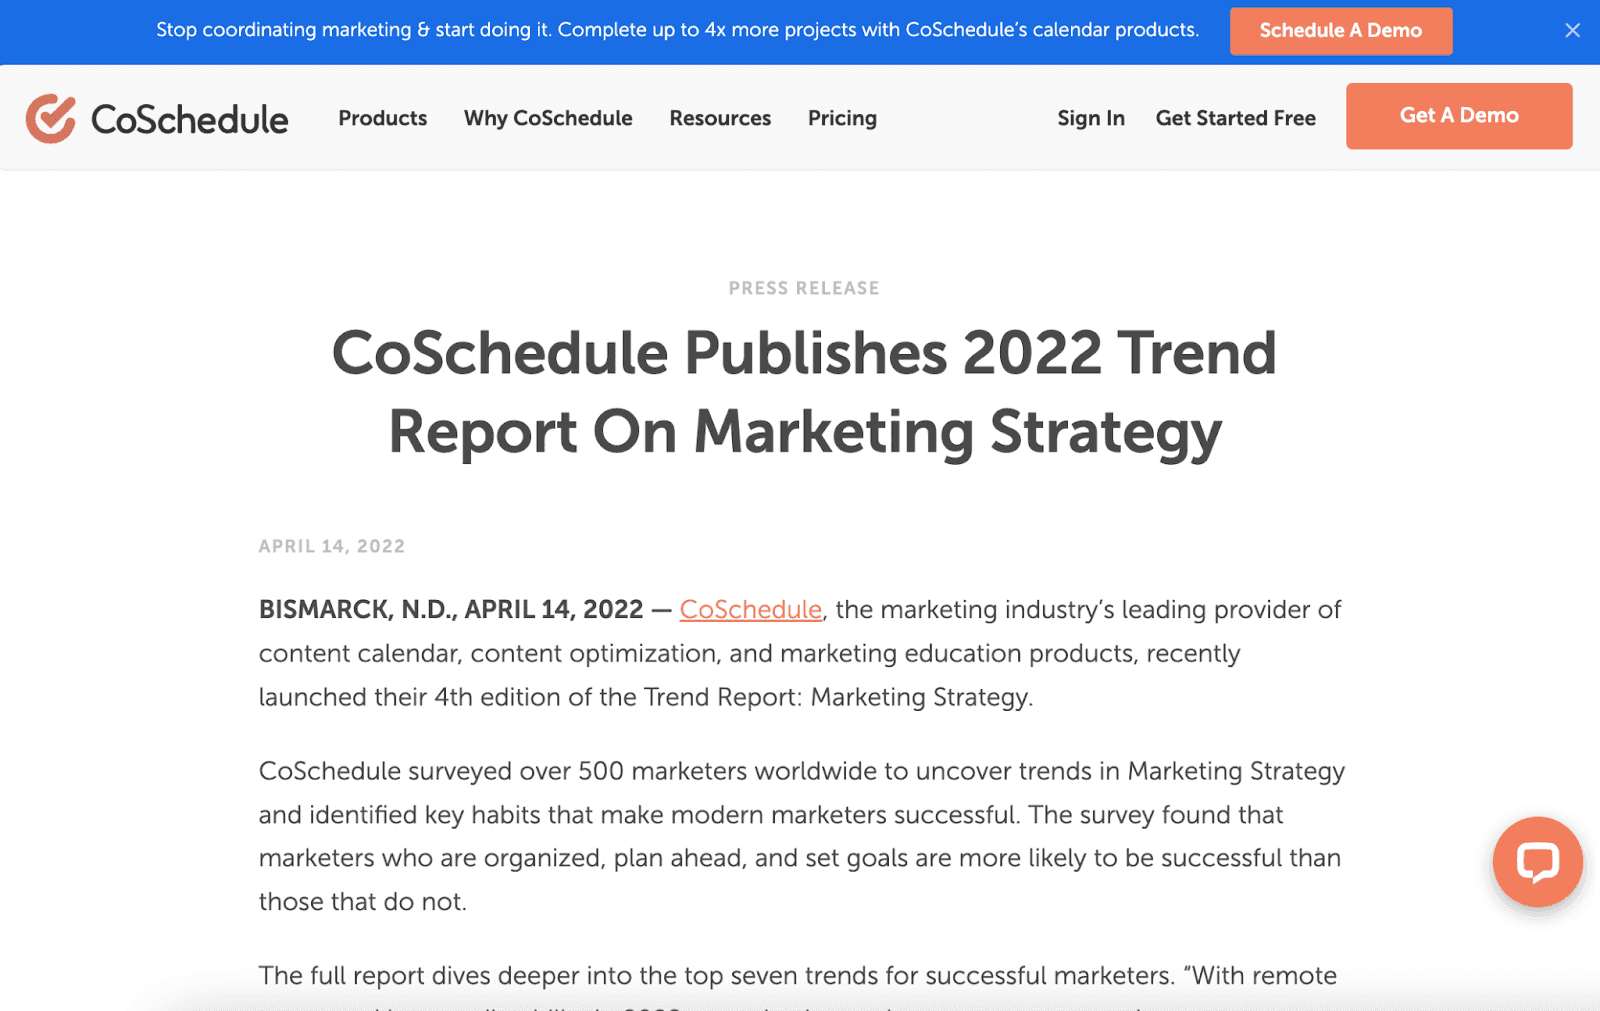 press release example of original research announcement from CoSchedule